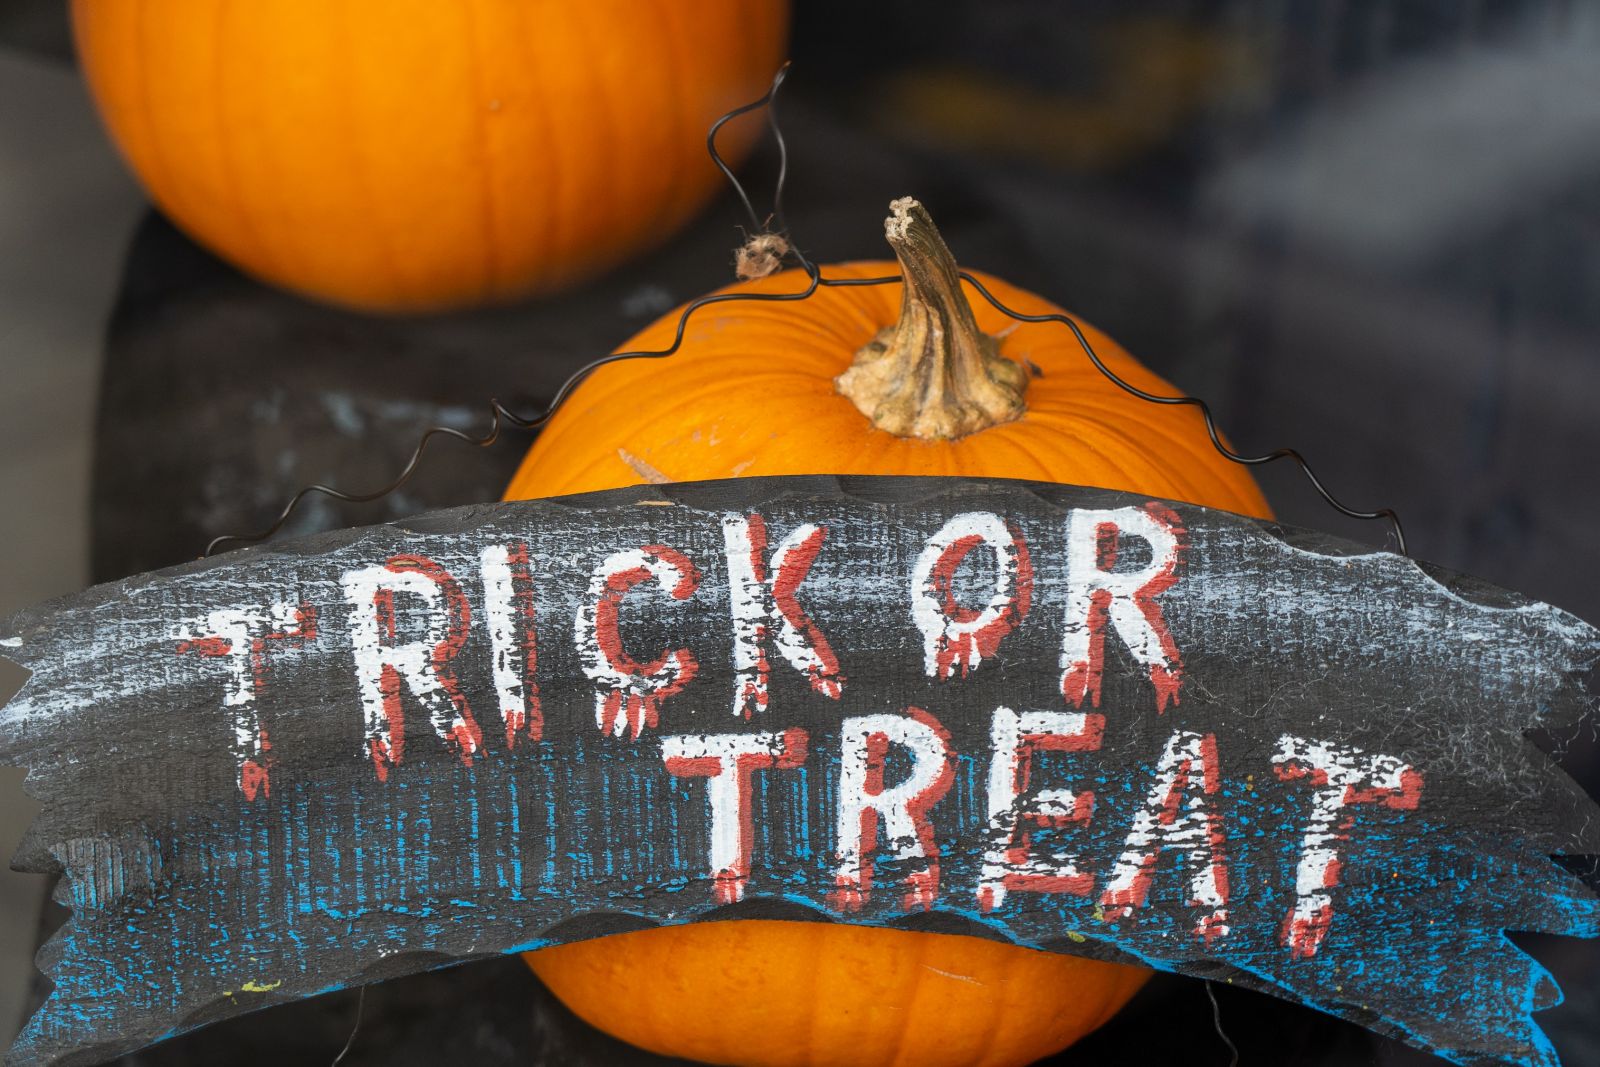 Shop Halloween sales for discounted costumes, decorations, and candy! 